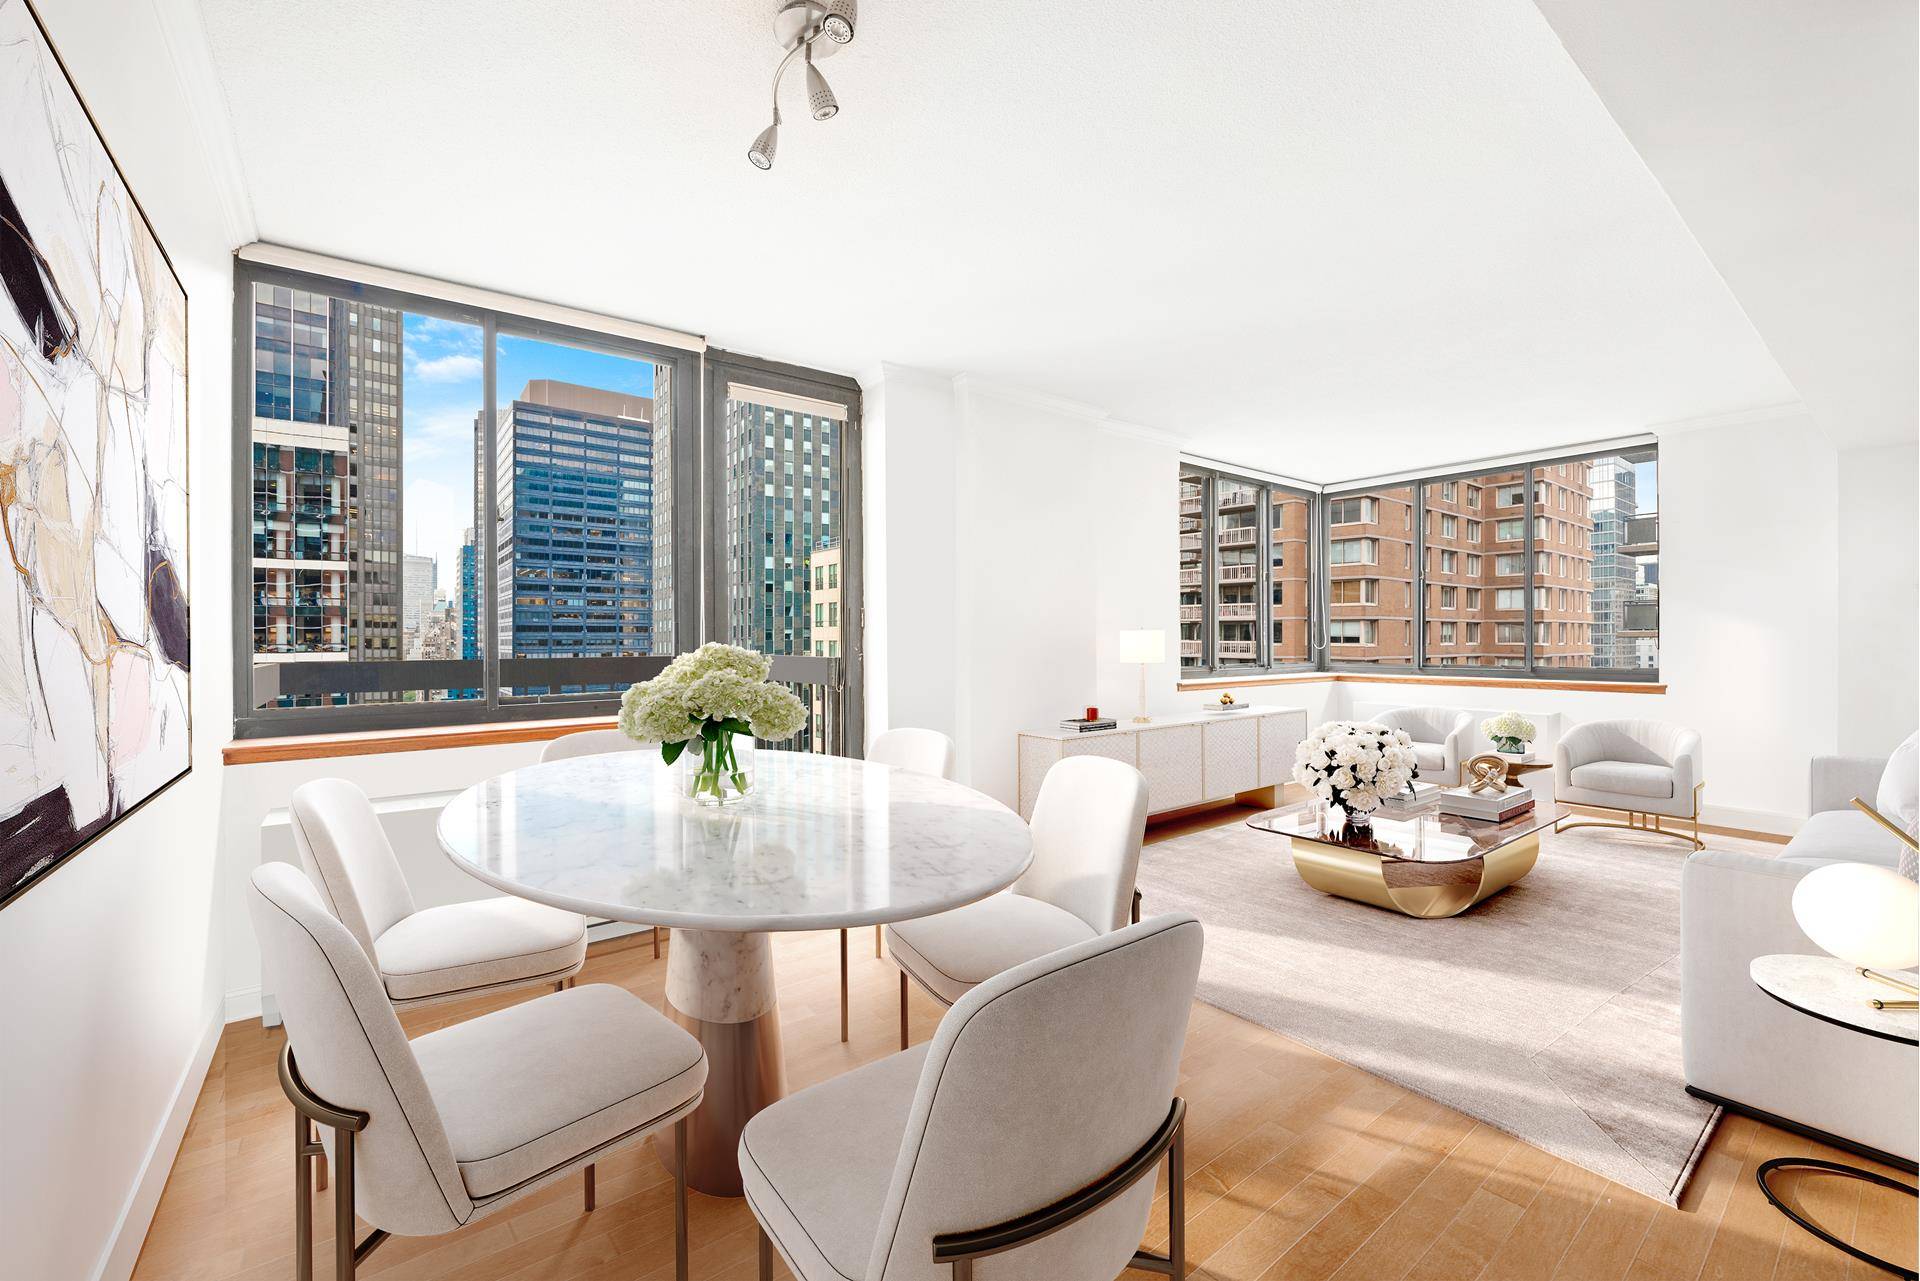 Renovated High Floor 2 Bed 2 Bath Condo with City Views and a BalconySituated on the 35th floor, this quiet and bright 2 Bedroom 2 Bath condominium features a gracious ...